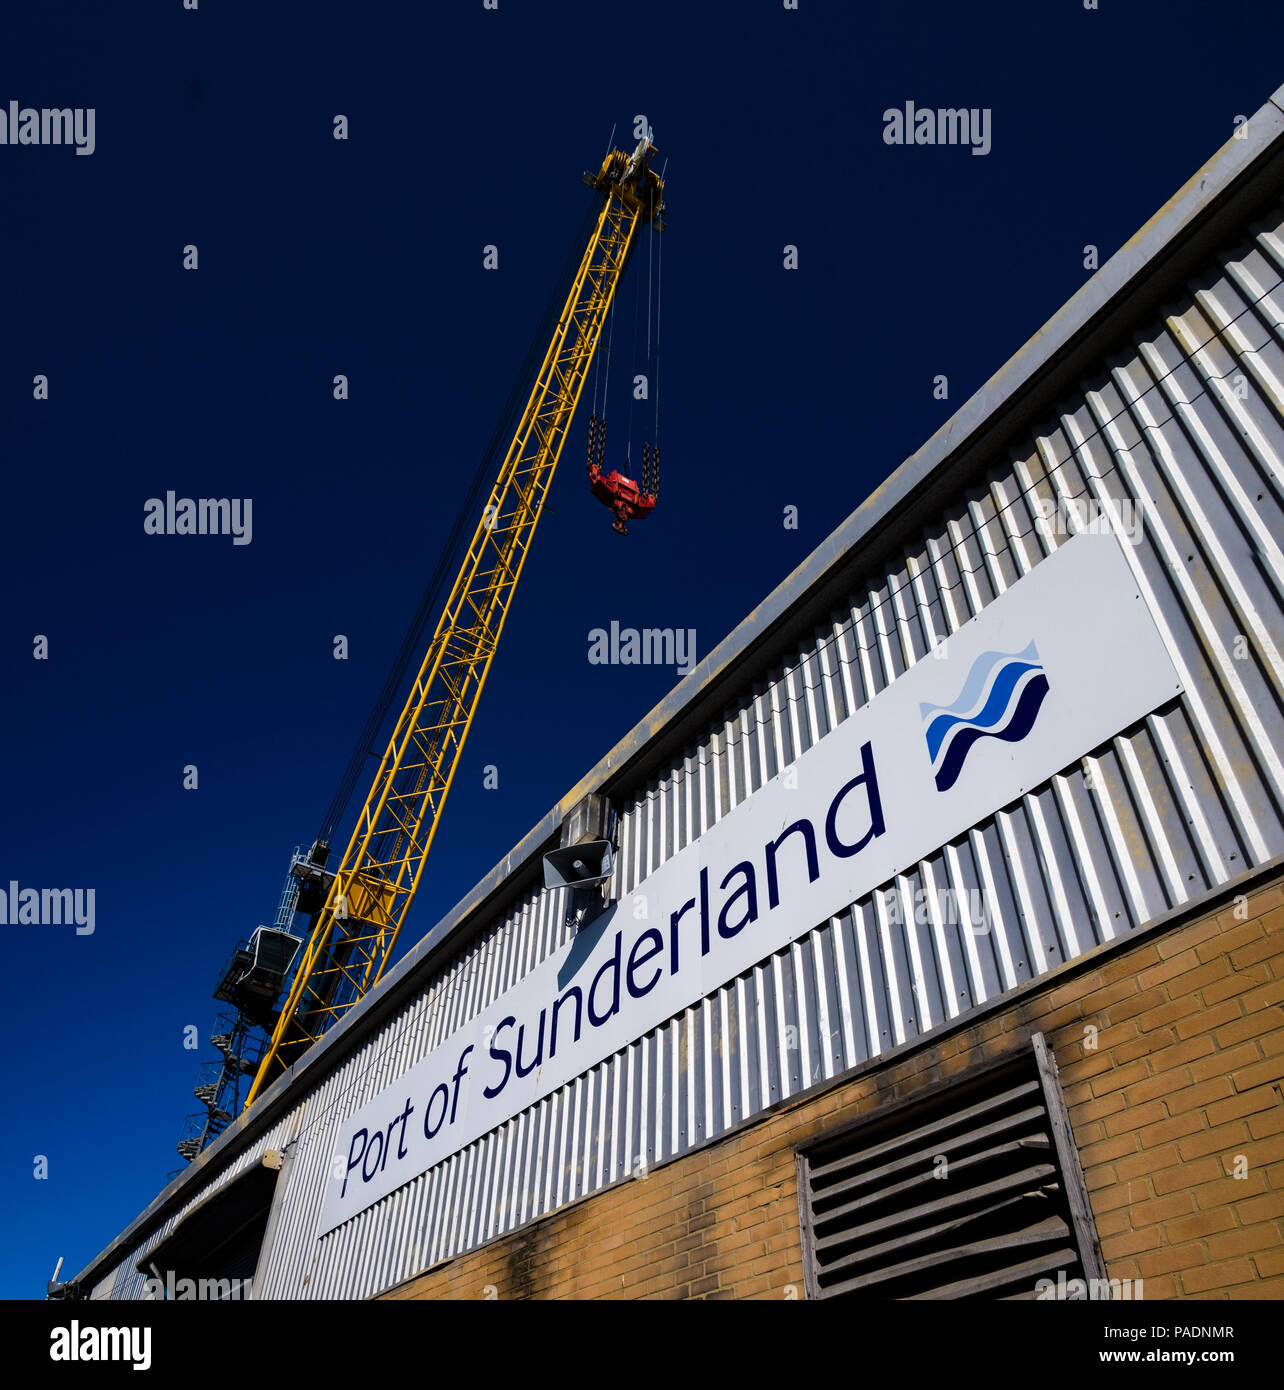 A crane towers above a warehouse building at the Port of Sunderland in the city in the north east of England. Stock Photo